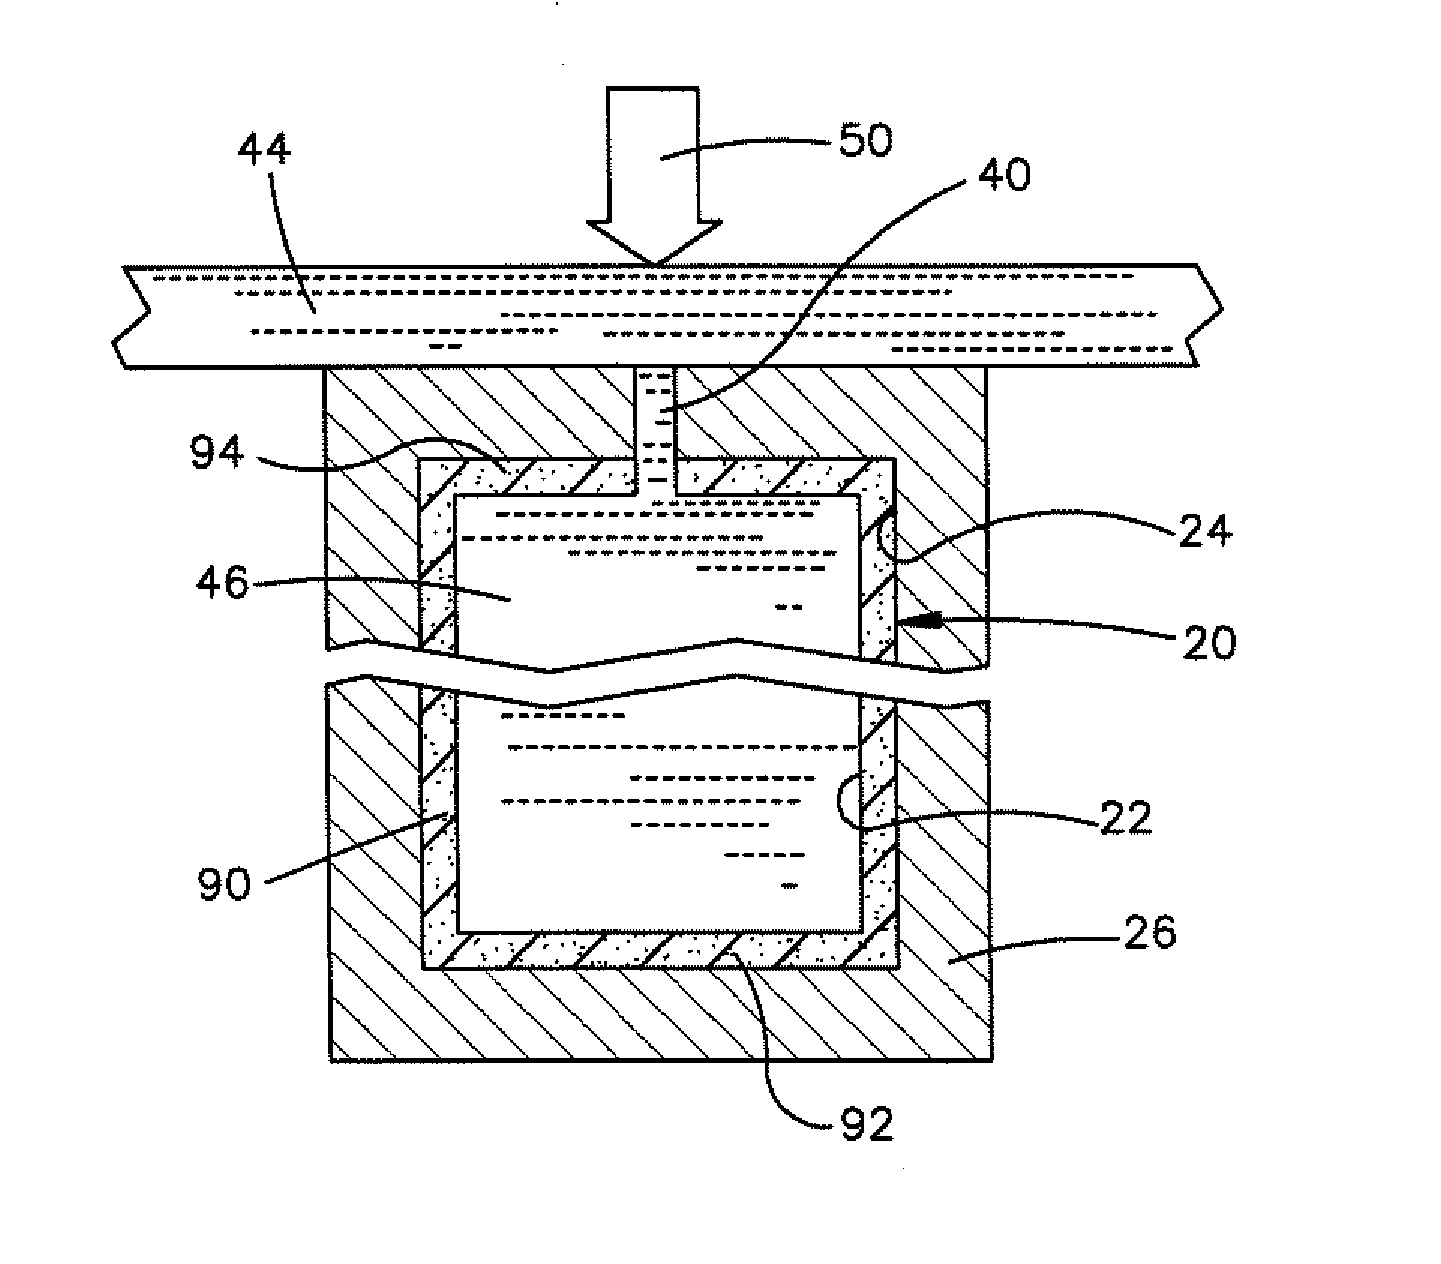 Method of forming a cast metal article